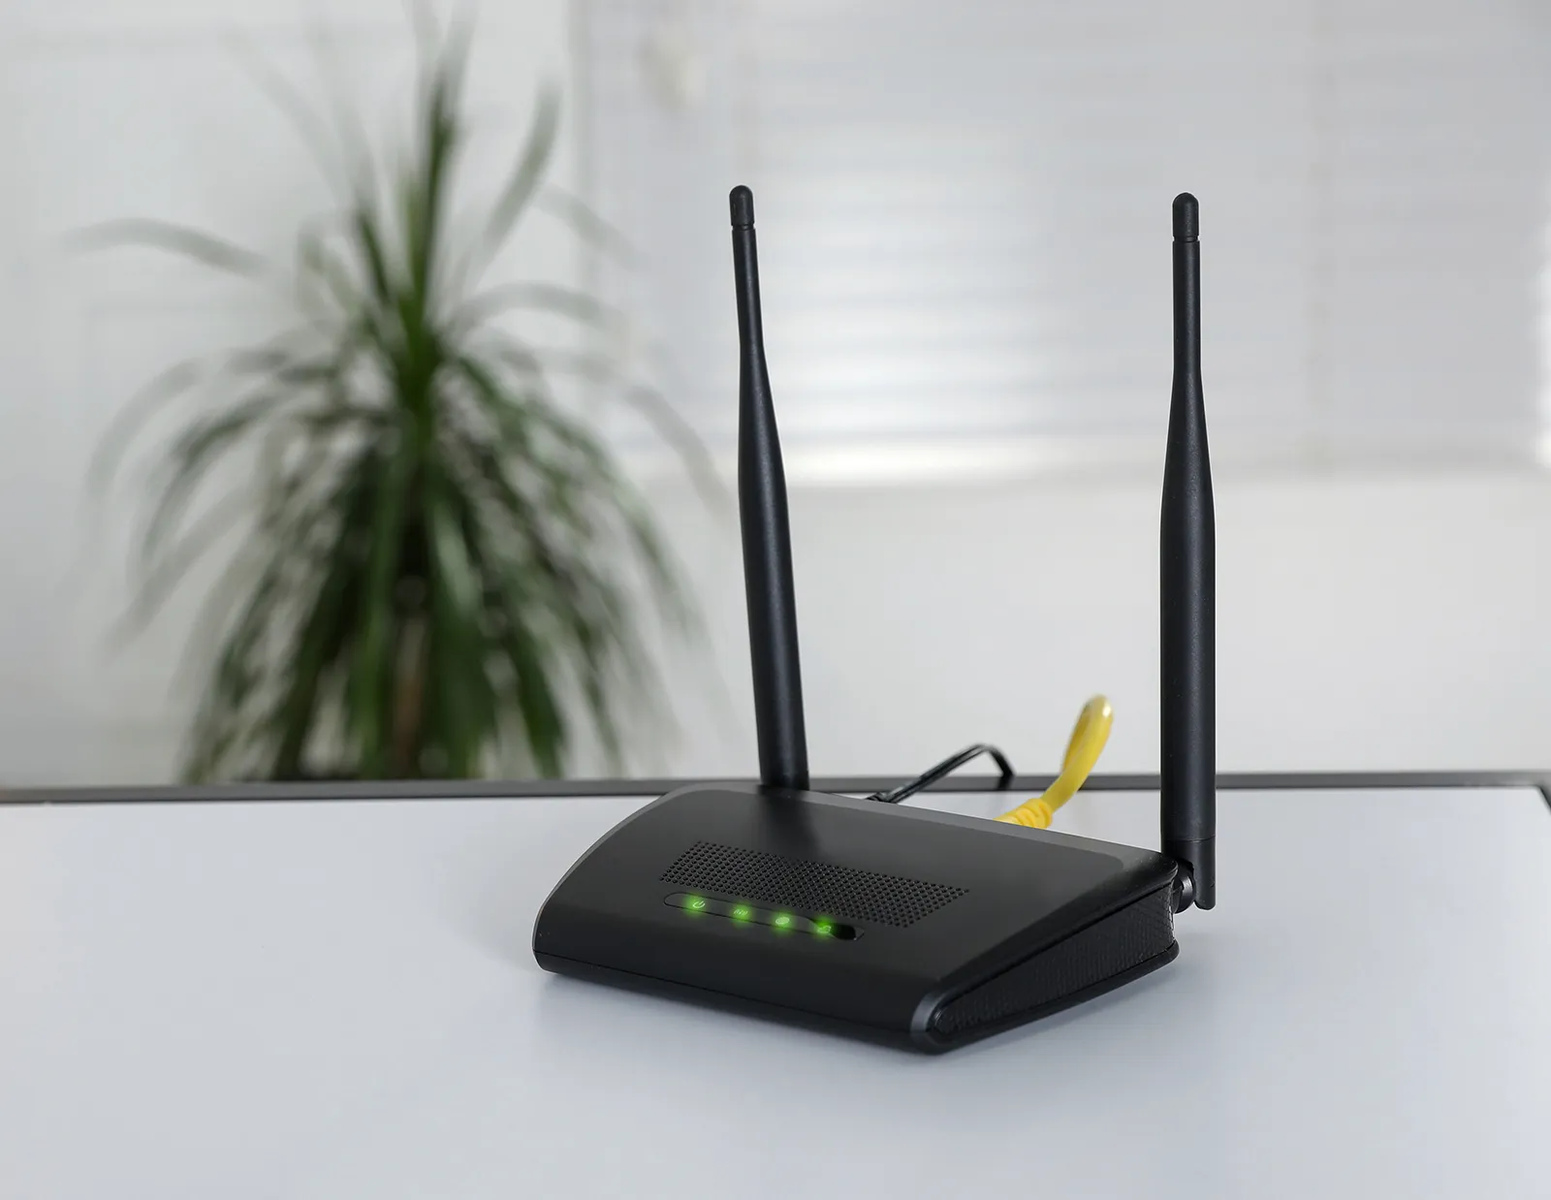 What Wireless Router Configuration Would Stop Outsiders From Using Your Home Network